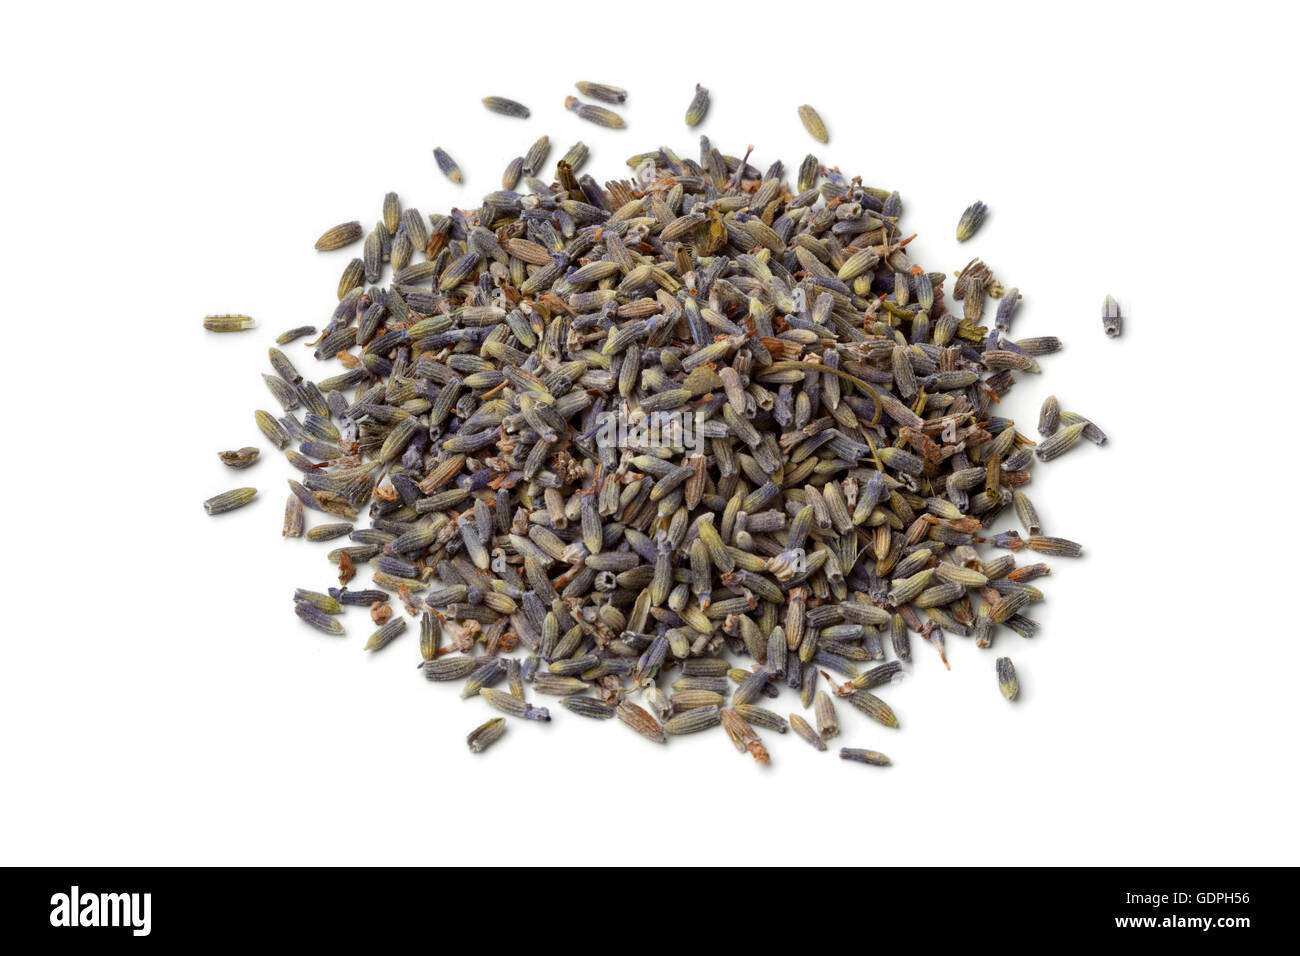 Heap of dried lavender flowers on white background Stock Photo